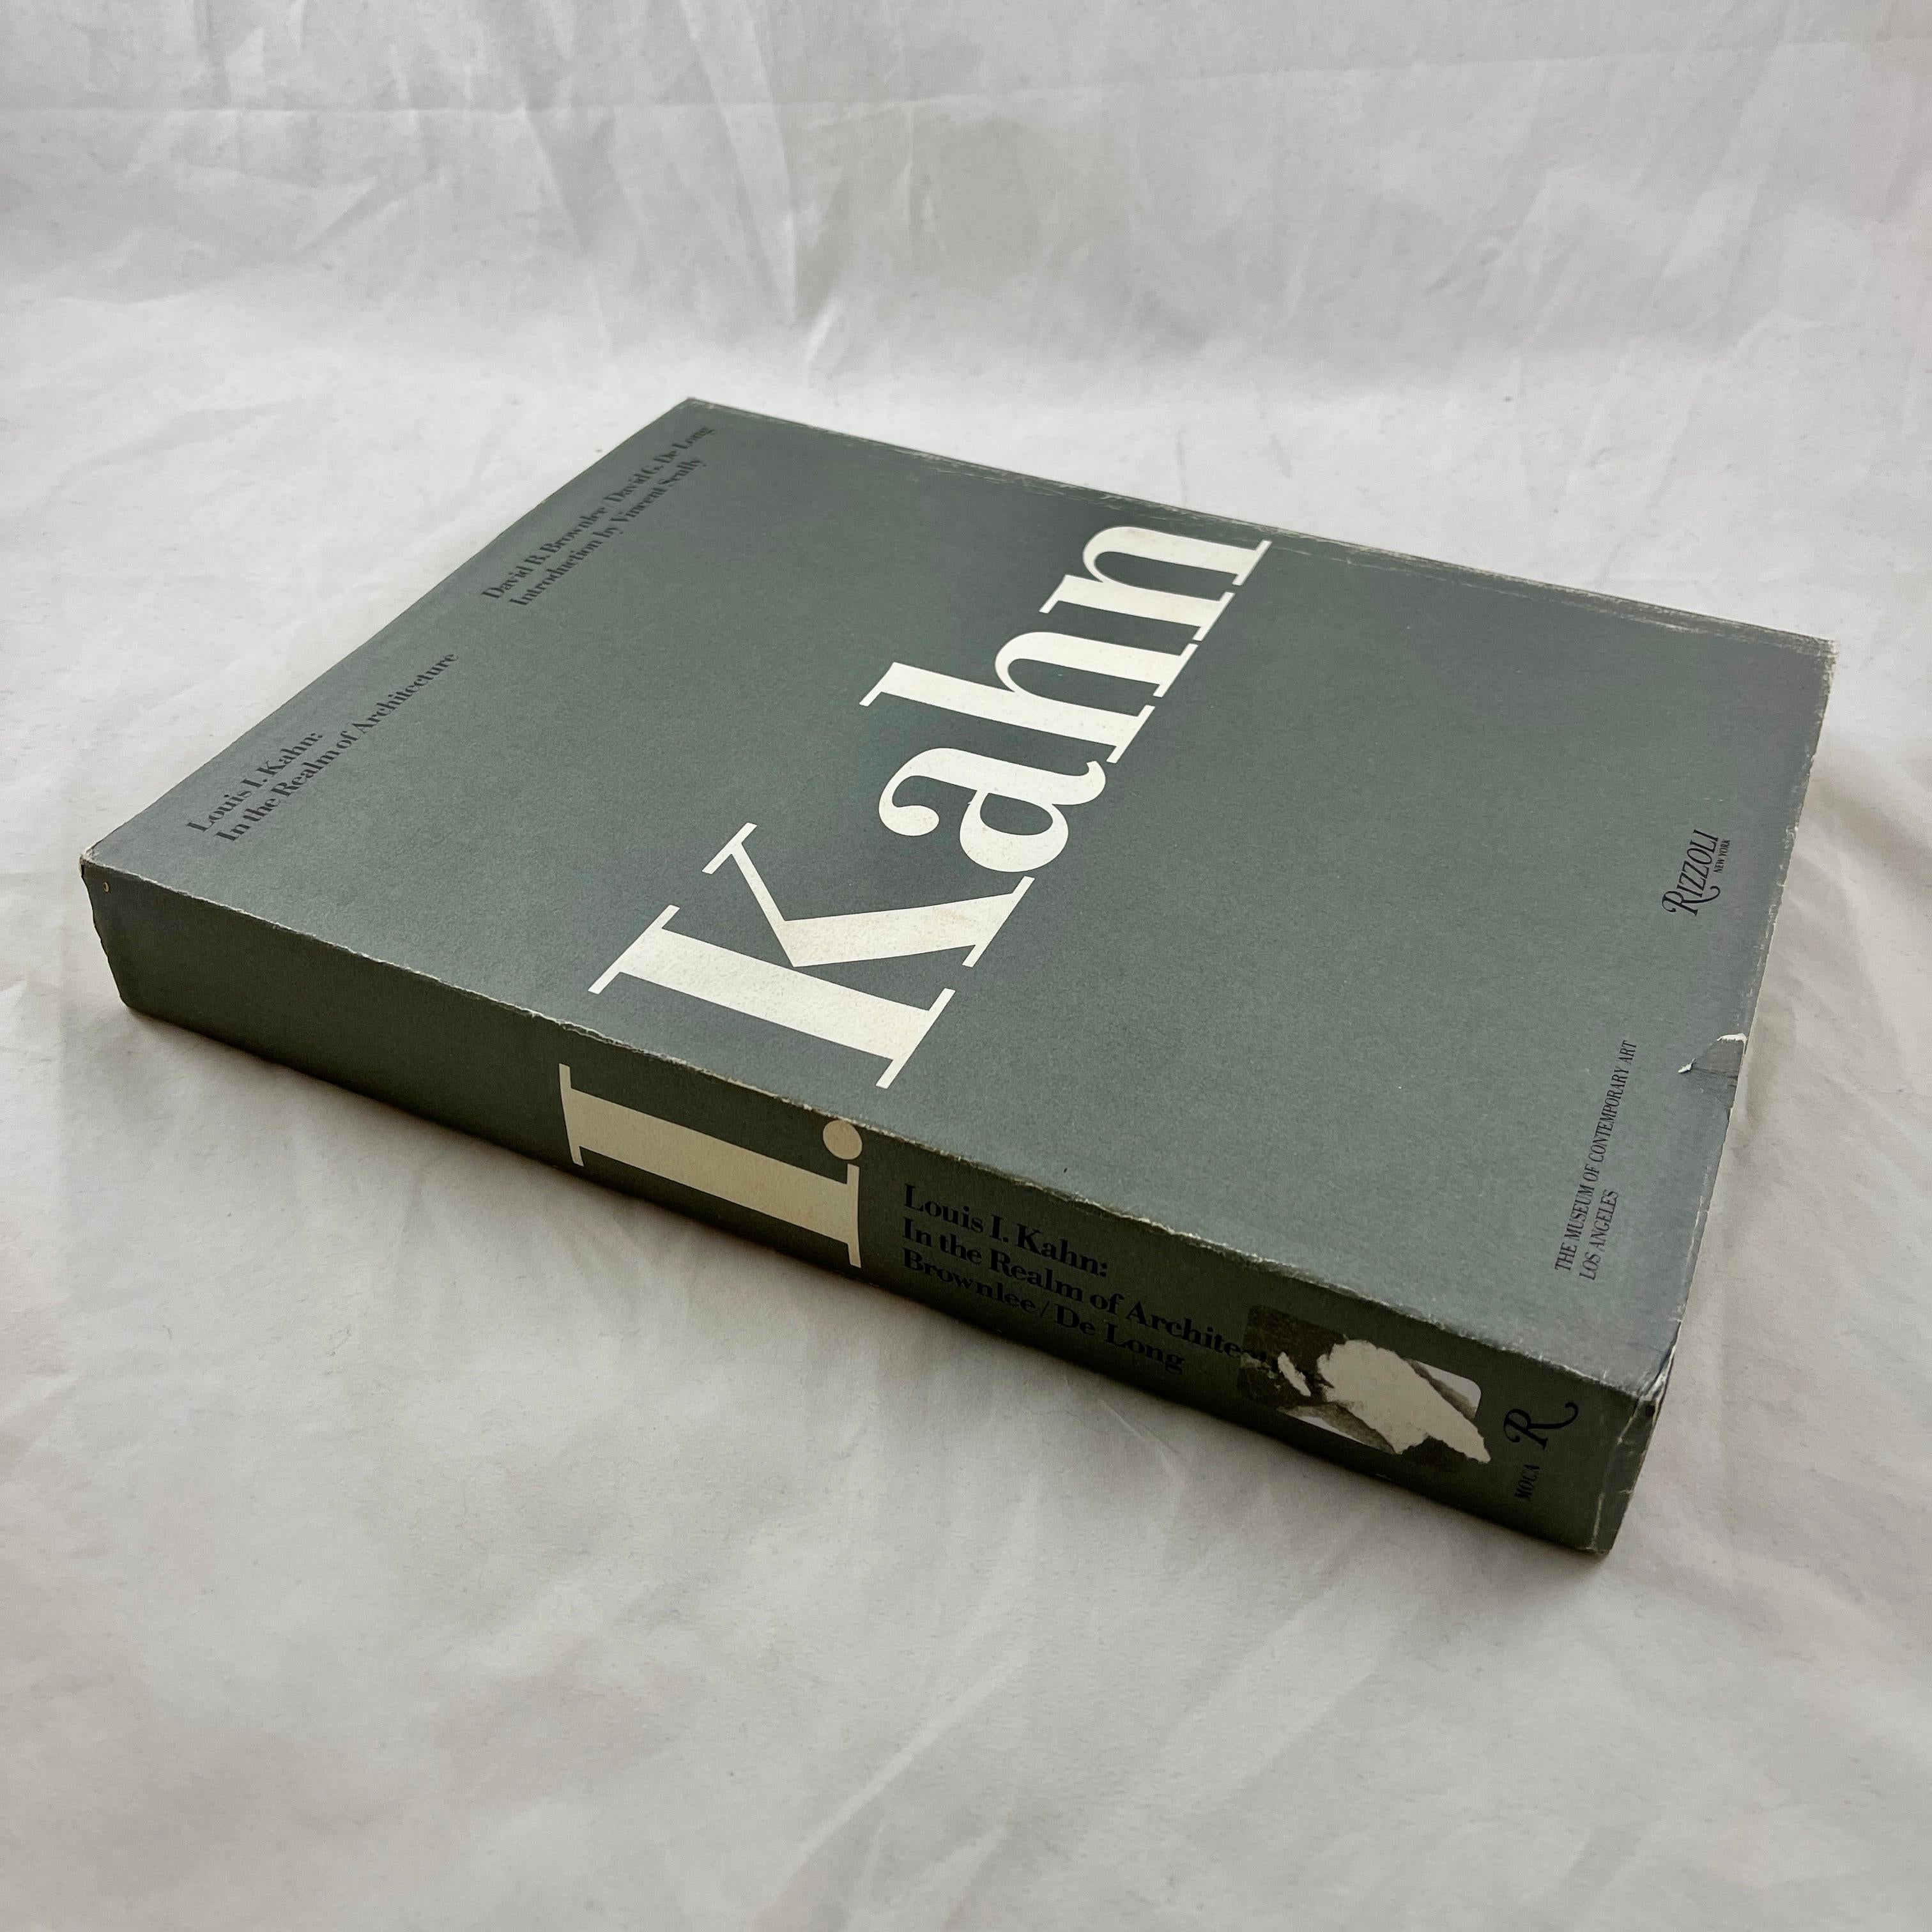 Louis i. Kahn: in the Realm of Architecture Coffee Table Book – 1st Edition 1991 2